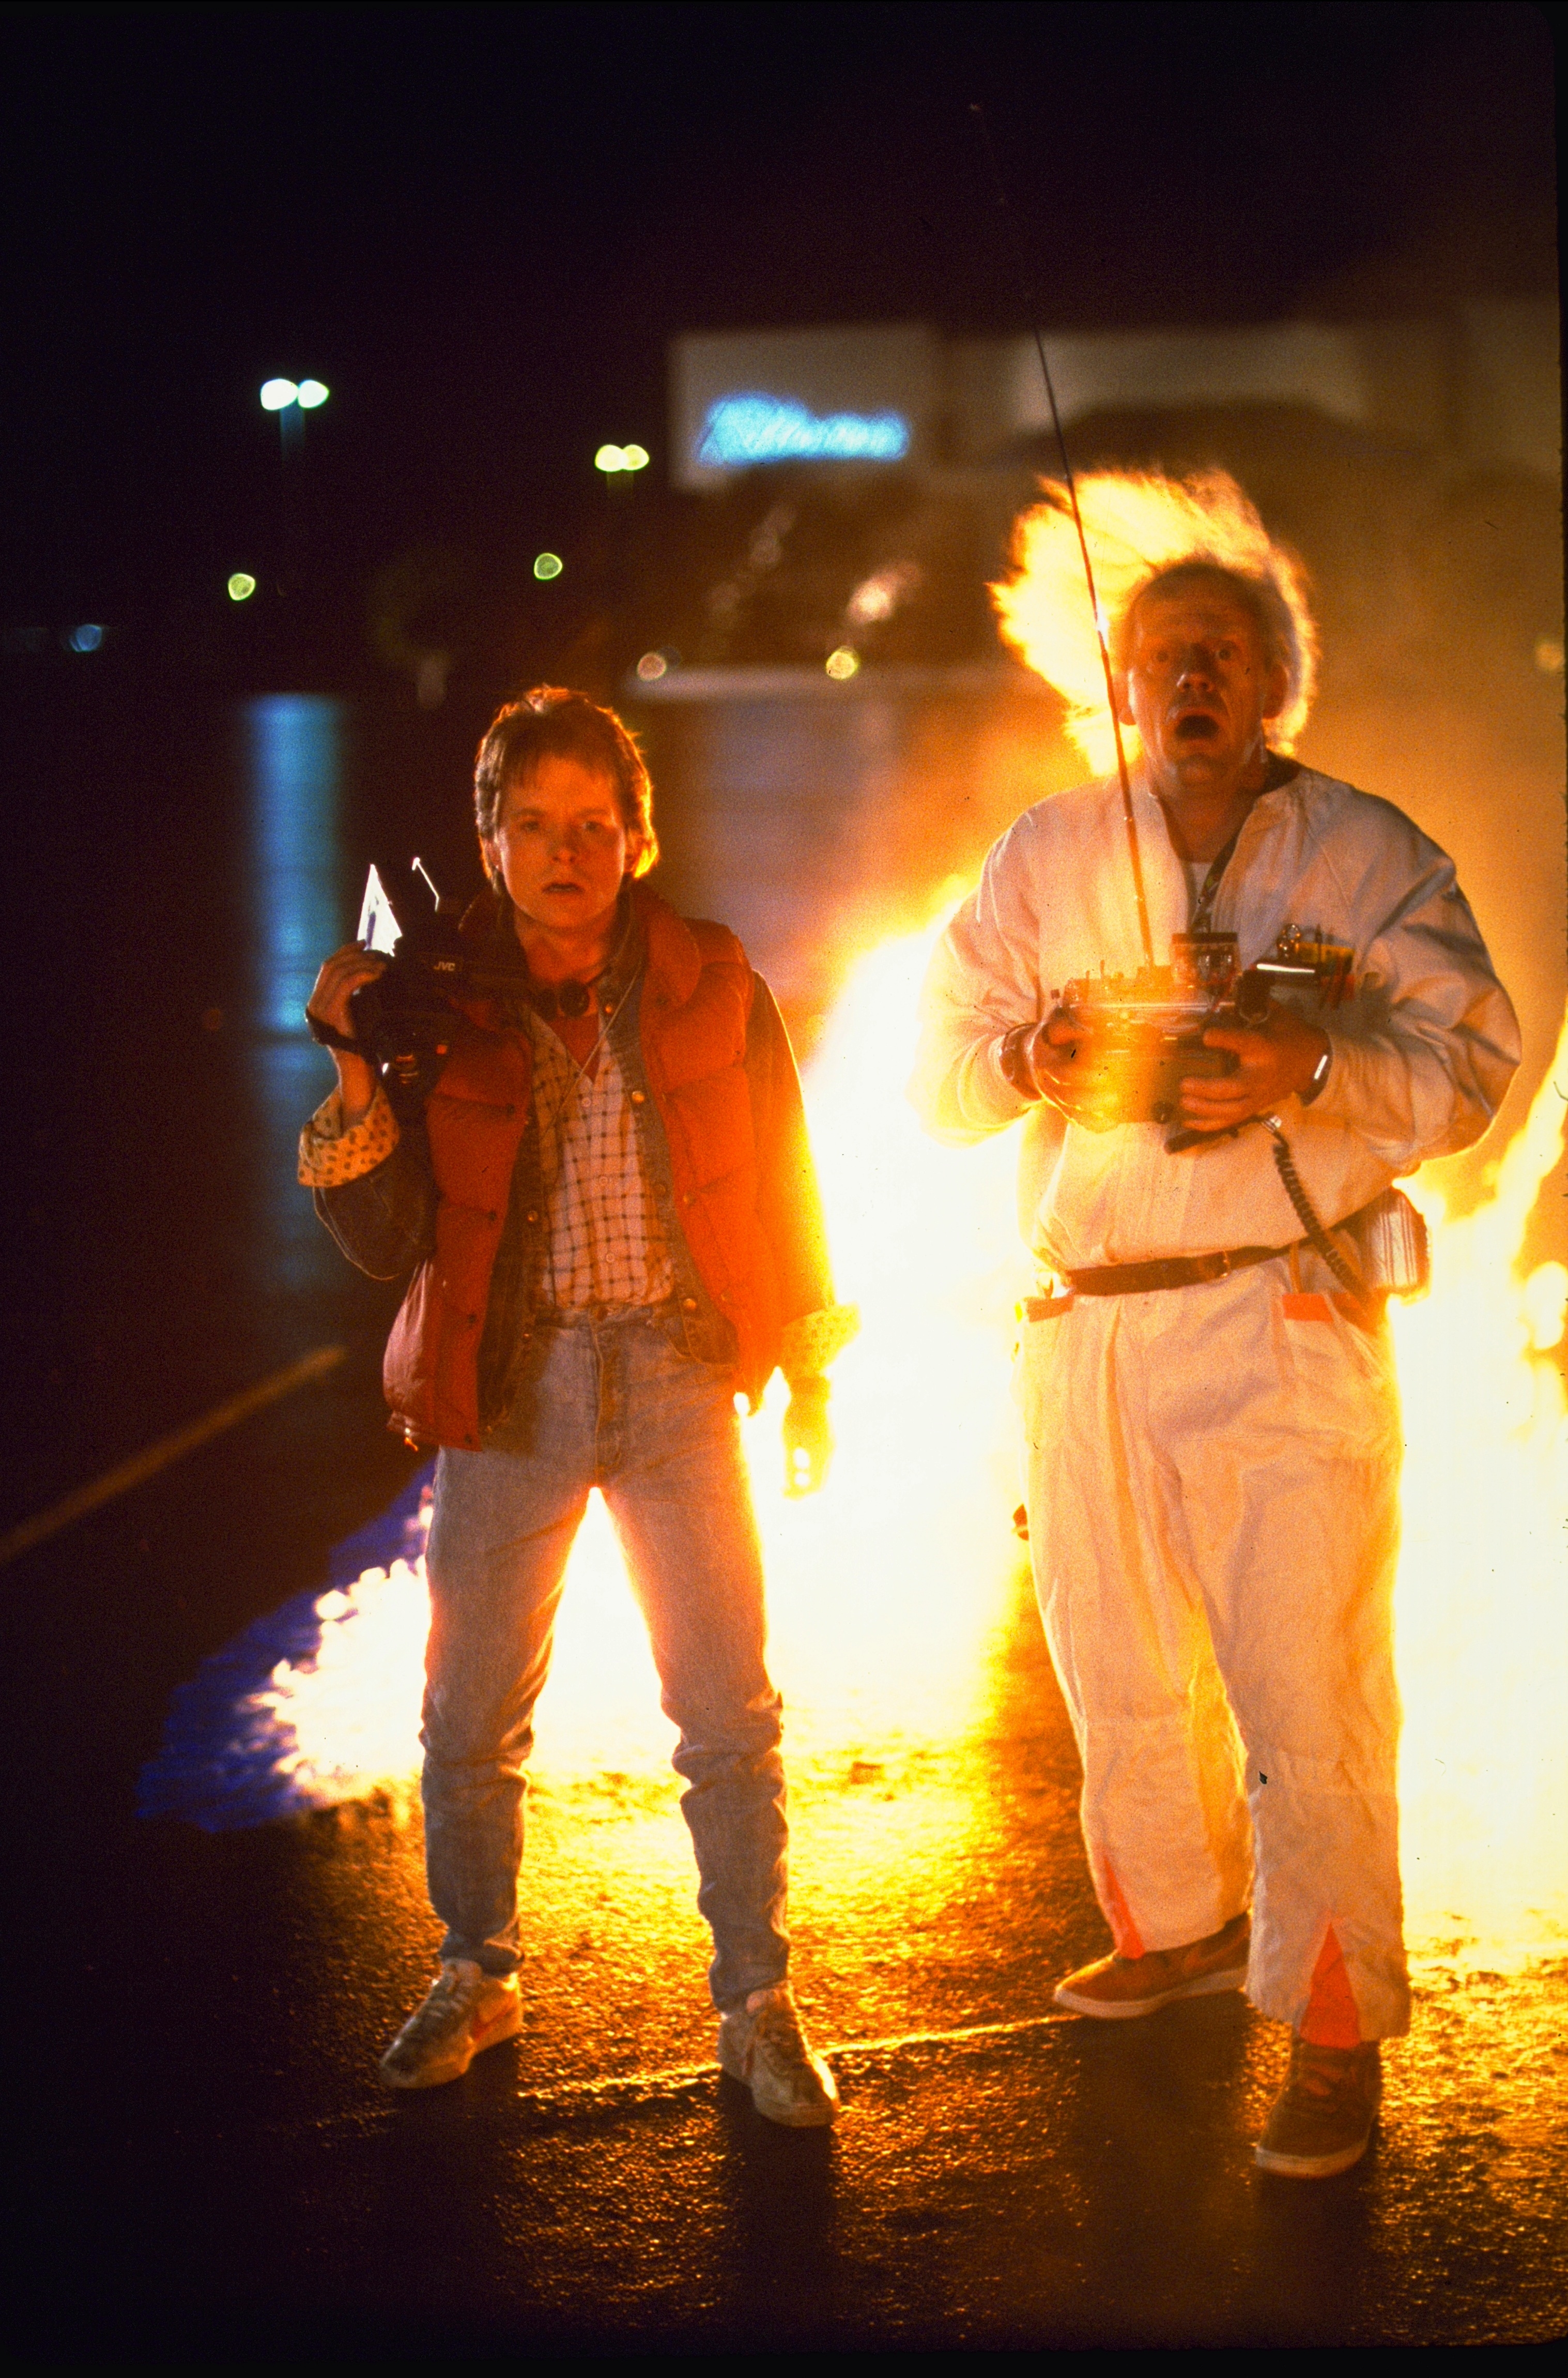 back to the future michael j fox marty mcfly 3034x4600 wallpaper High Quality Wallpaper, High Definition Wallpaper